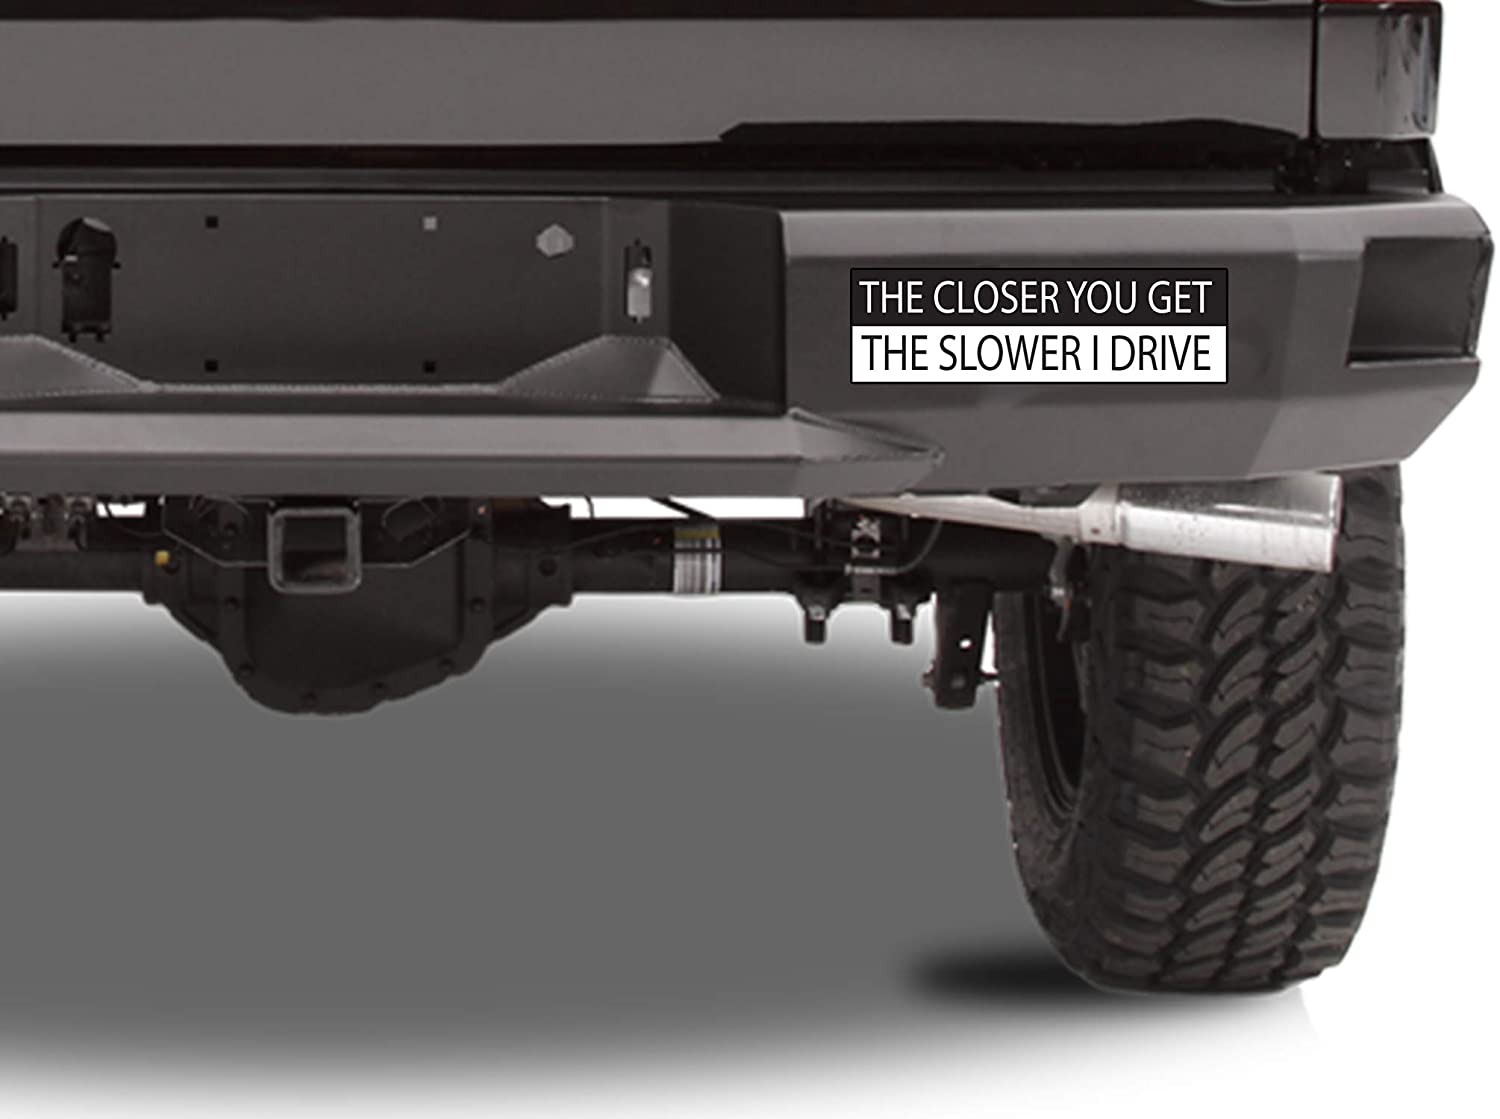 Rogue River Tactical 10in x 3in Large Funny Auto Decal Bumper Sticker The Closer You Get The Slower I Drive Car Truck Boat RV (Slower)